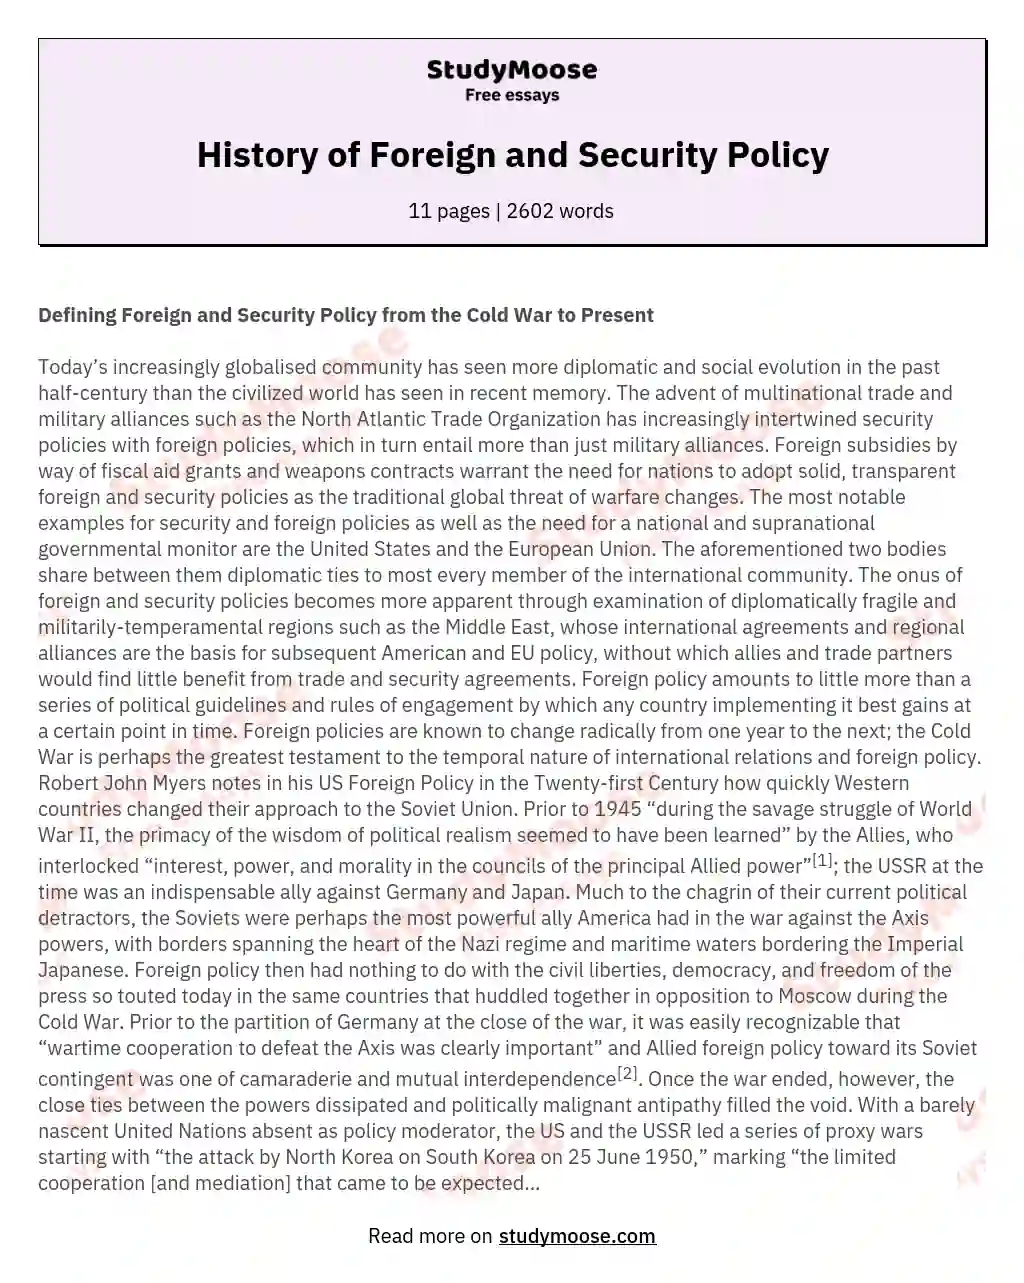 History of Foreign and Security Policy essay